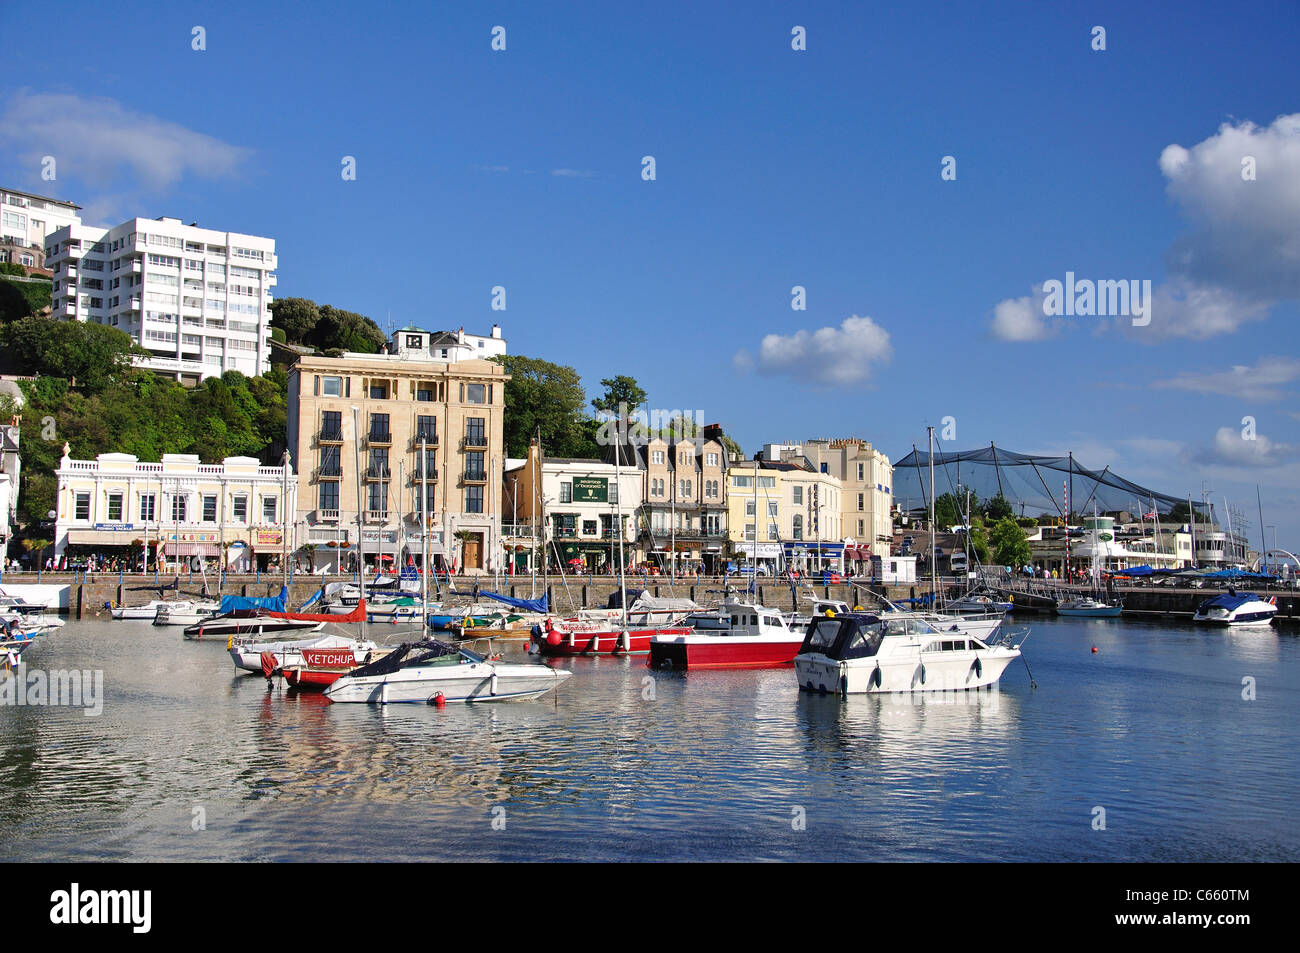 Town and harbour view, Torquay, Devon, England, United Kingdom Stock Photo